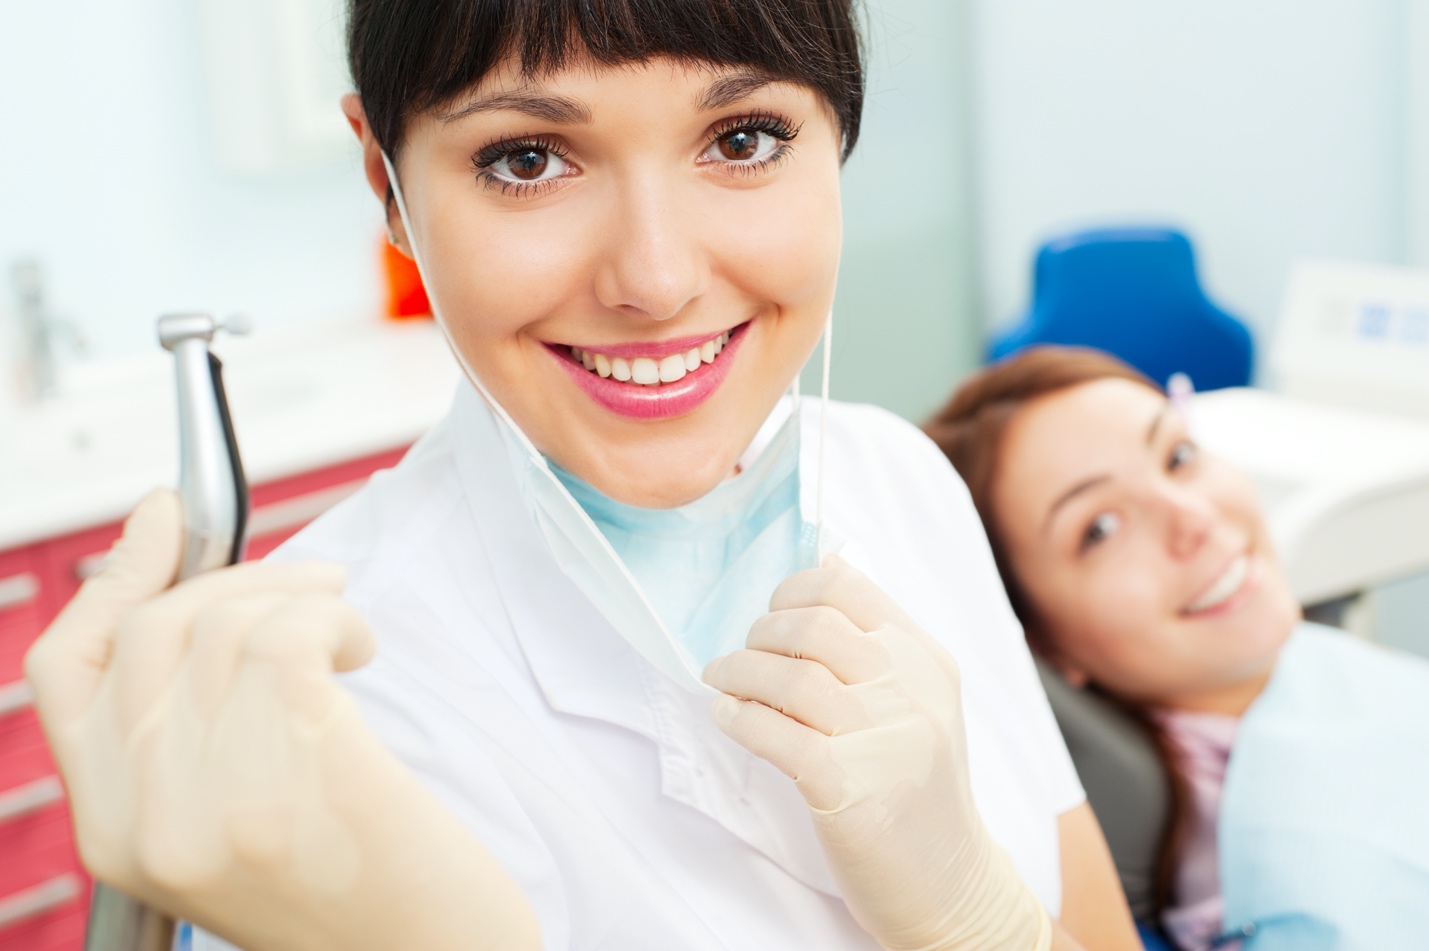 The Five Most Important Qualities of a Dental Assistant